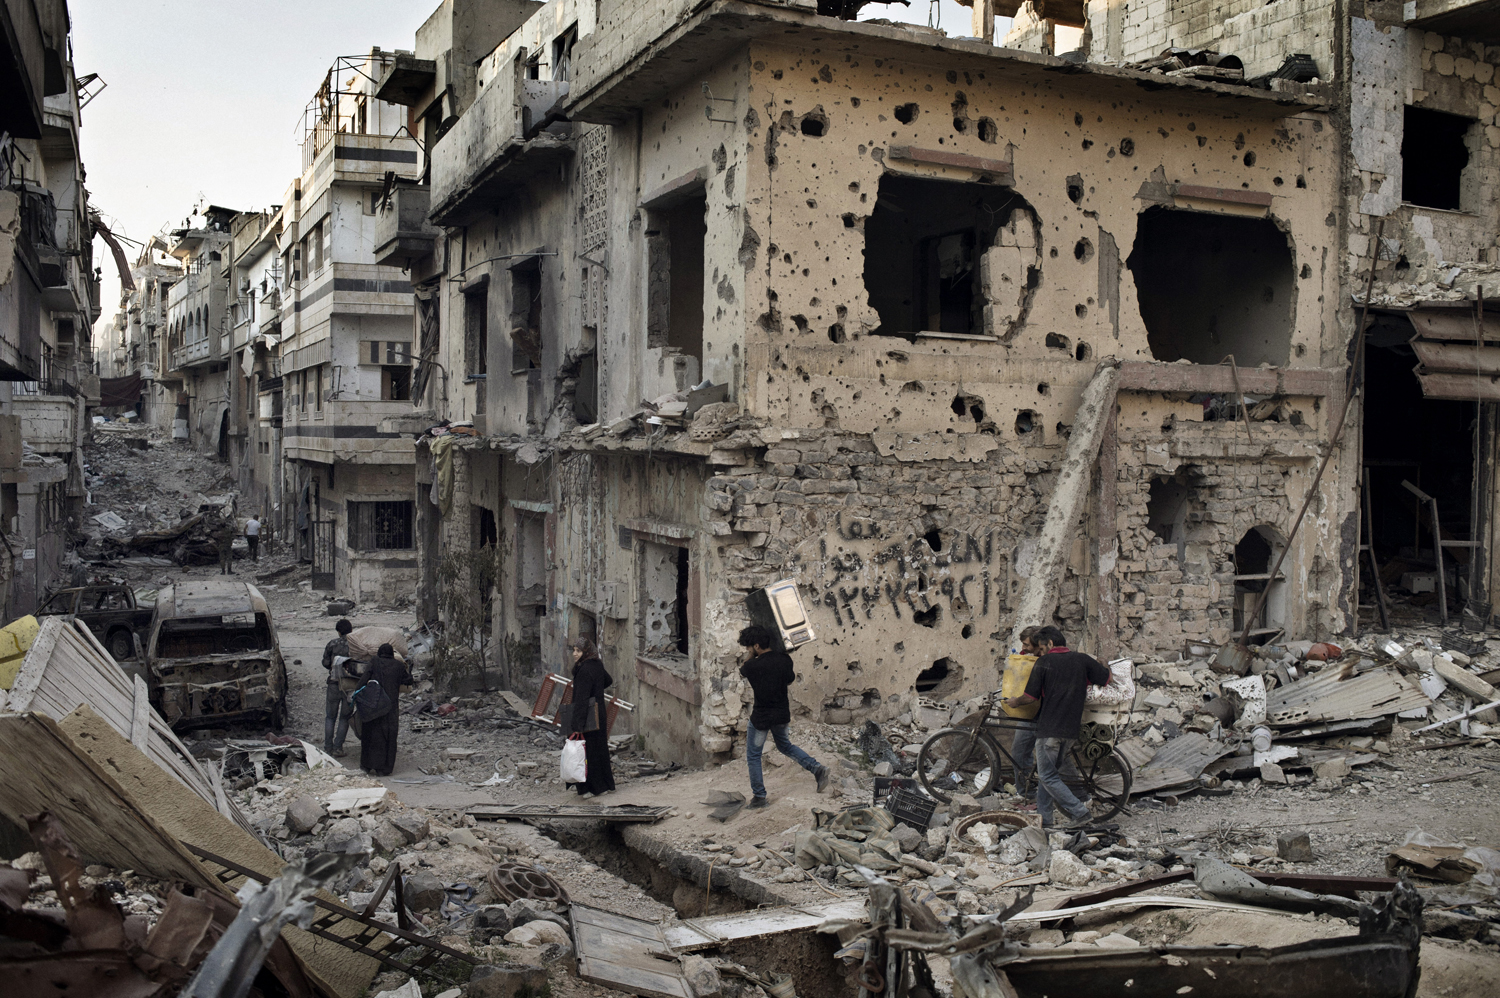 In the wake of a cease-fire, residents of Homs reclaim belongings from their devastated homes. May 12, 2014.